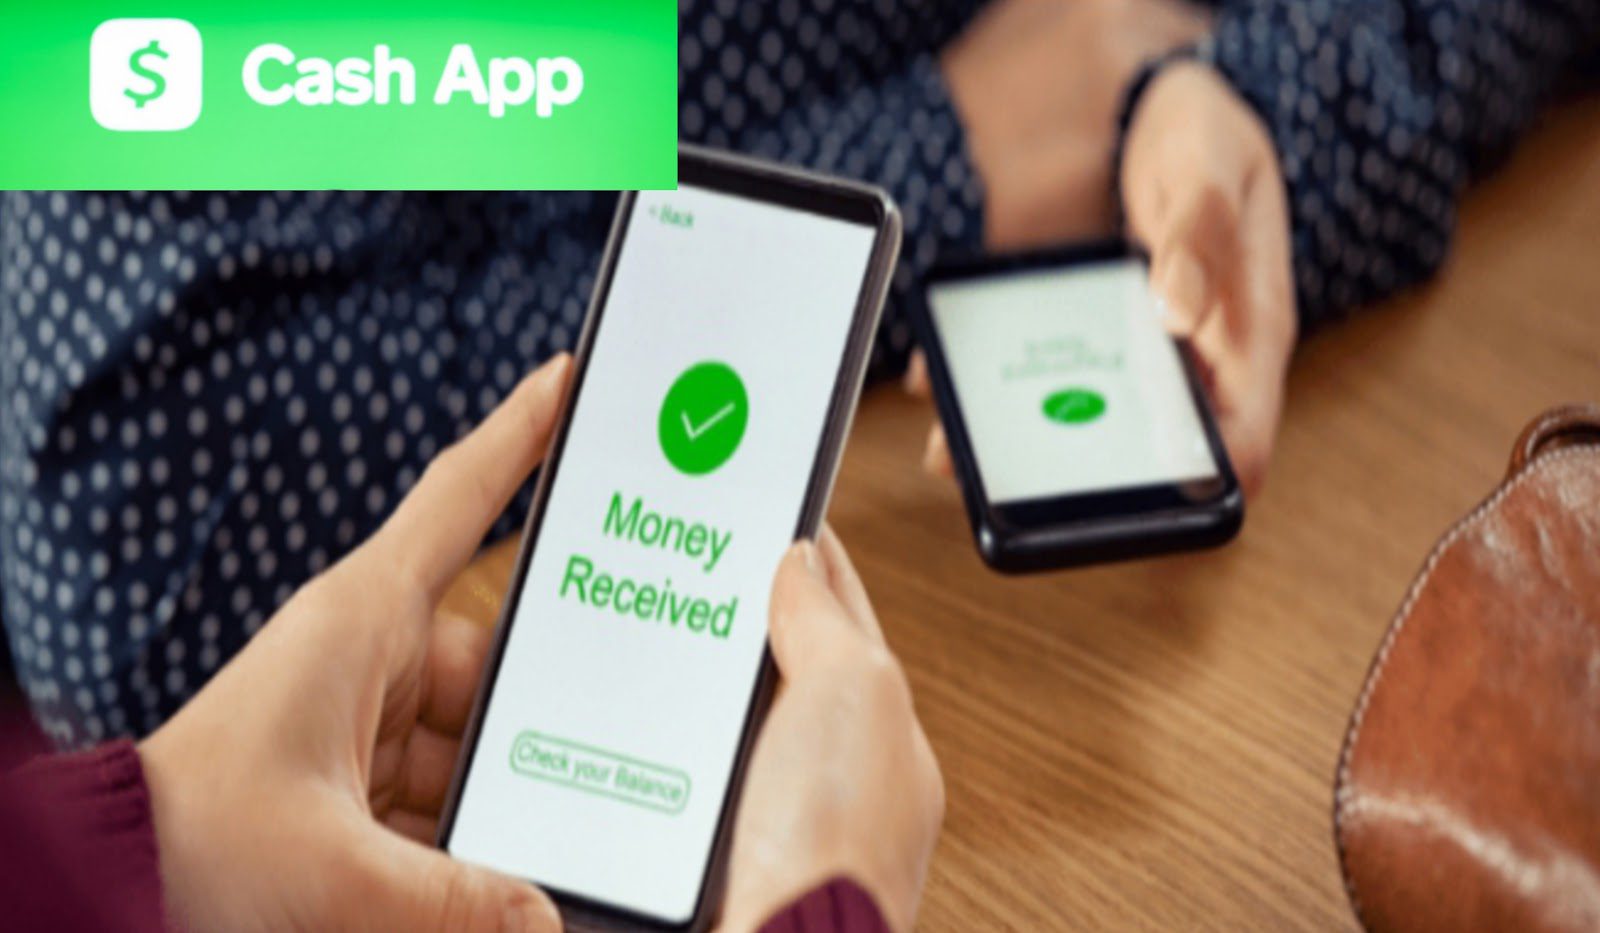 Can I Use Cash App To Transfer Money To Myself?